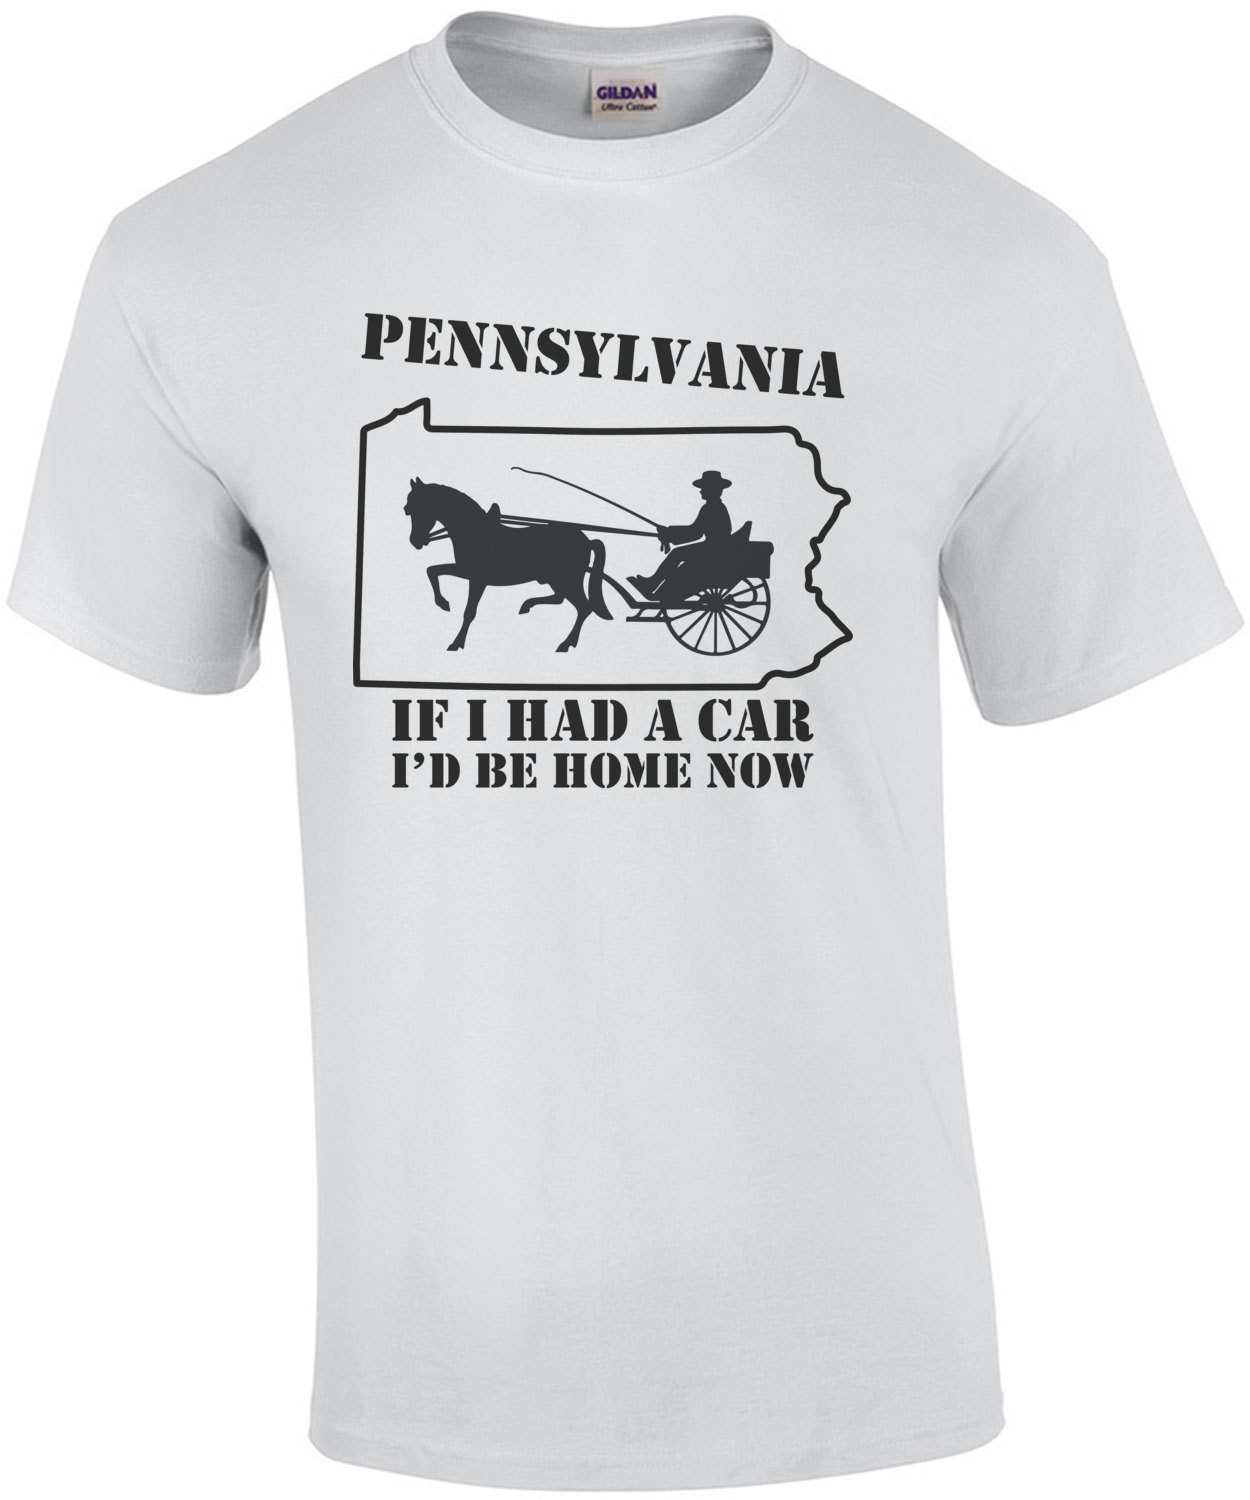 Pennsylvania - If I had a car I'd be home by now - Pennsylvania T-Shirt